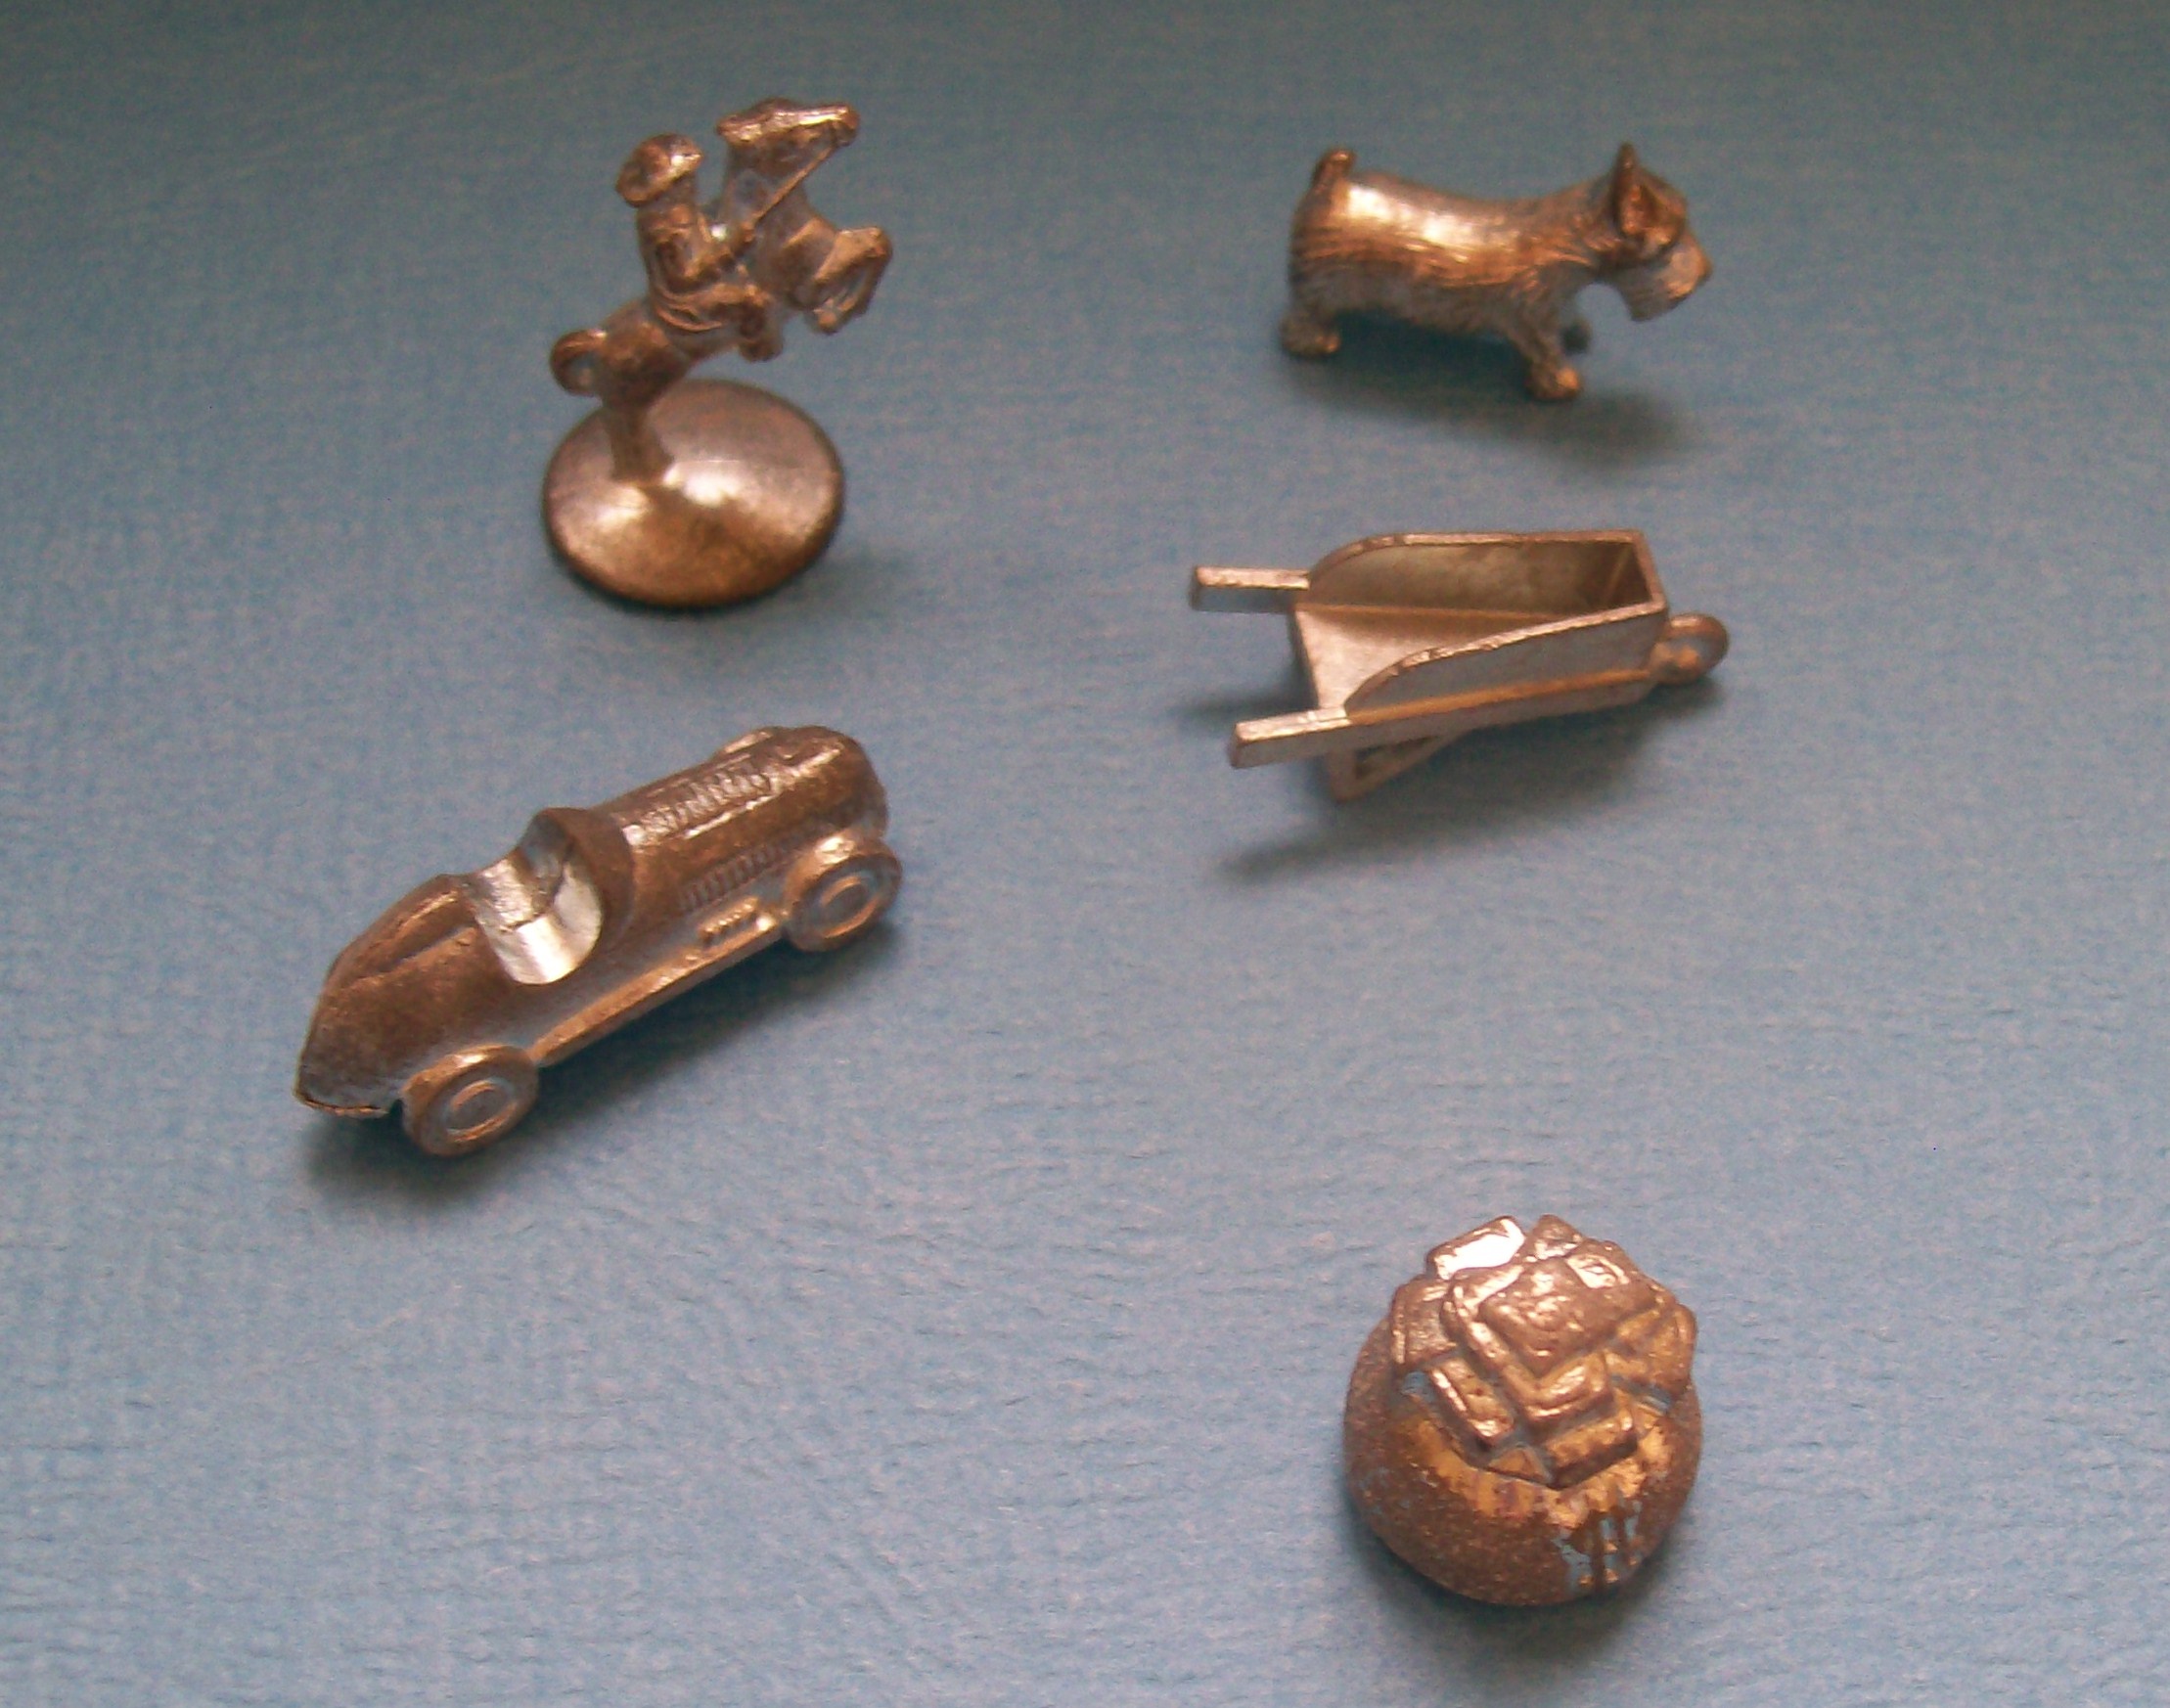 history of monopoly game pieces